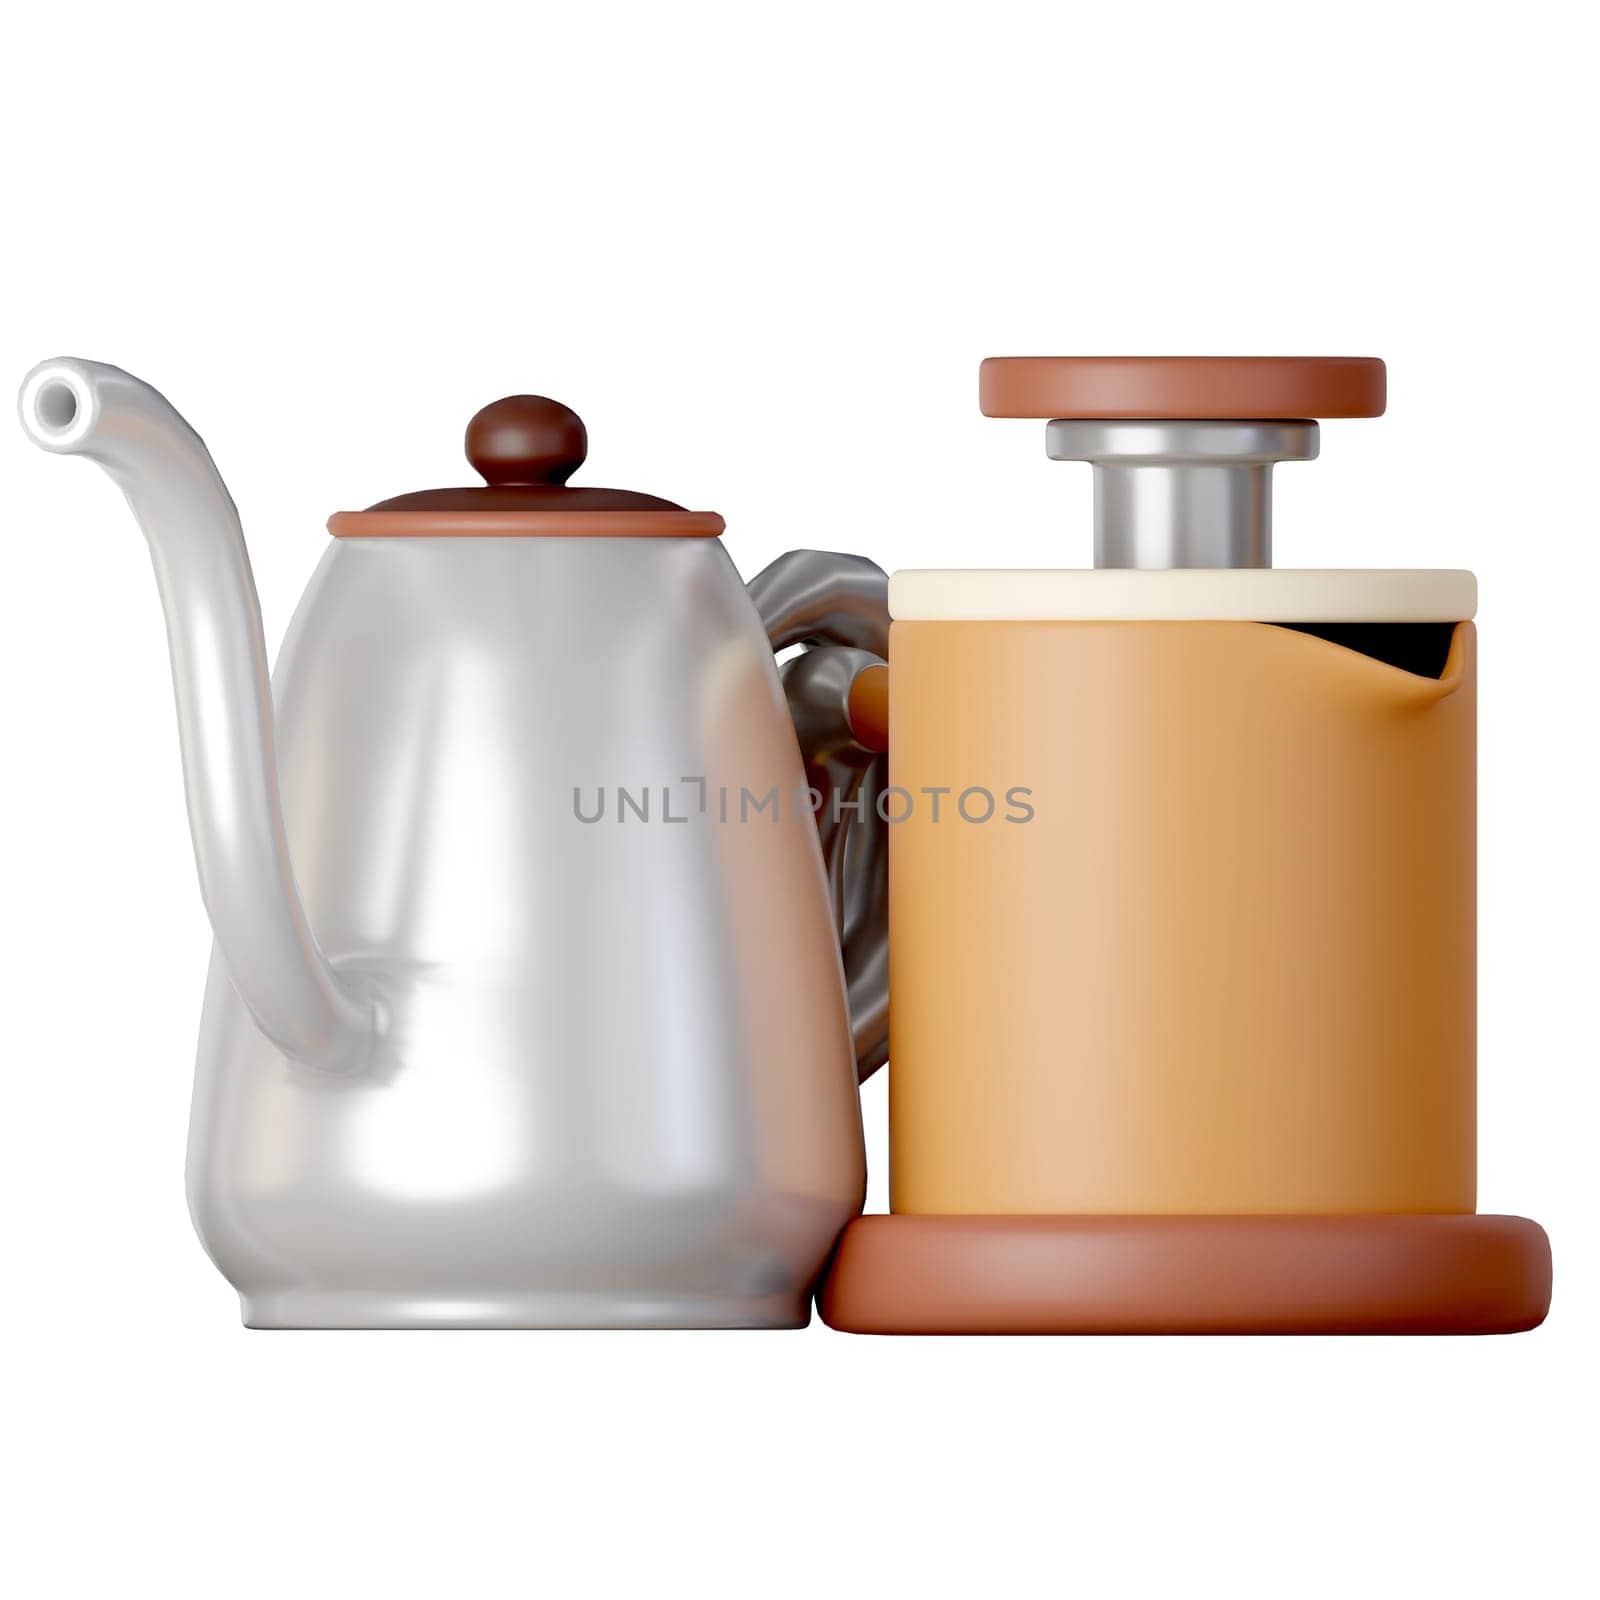 A kettle and french press Cartoon Style Isolated on a White Background. 3d illustration by meepiangraphic